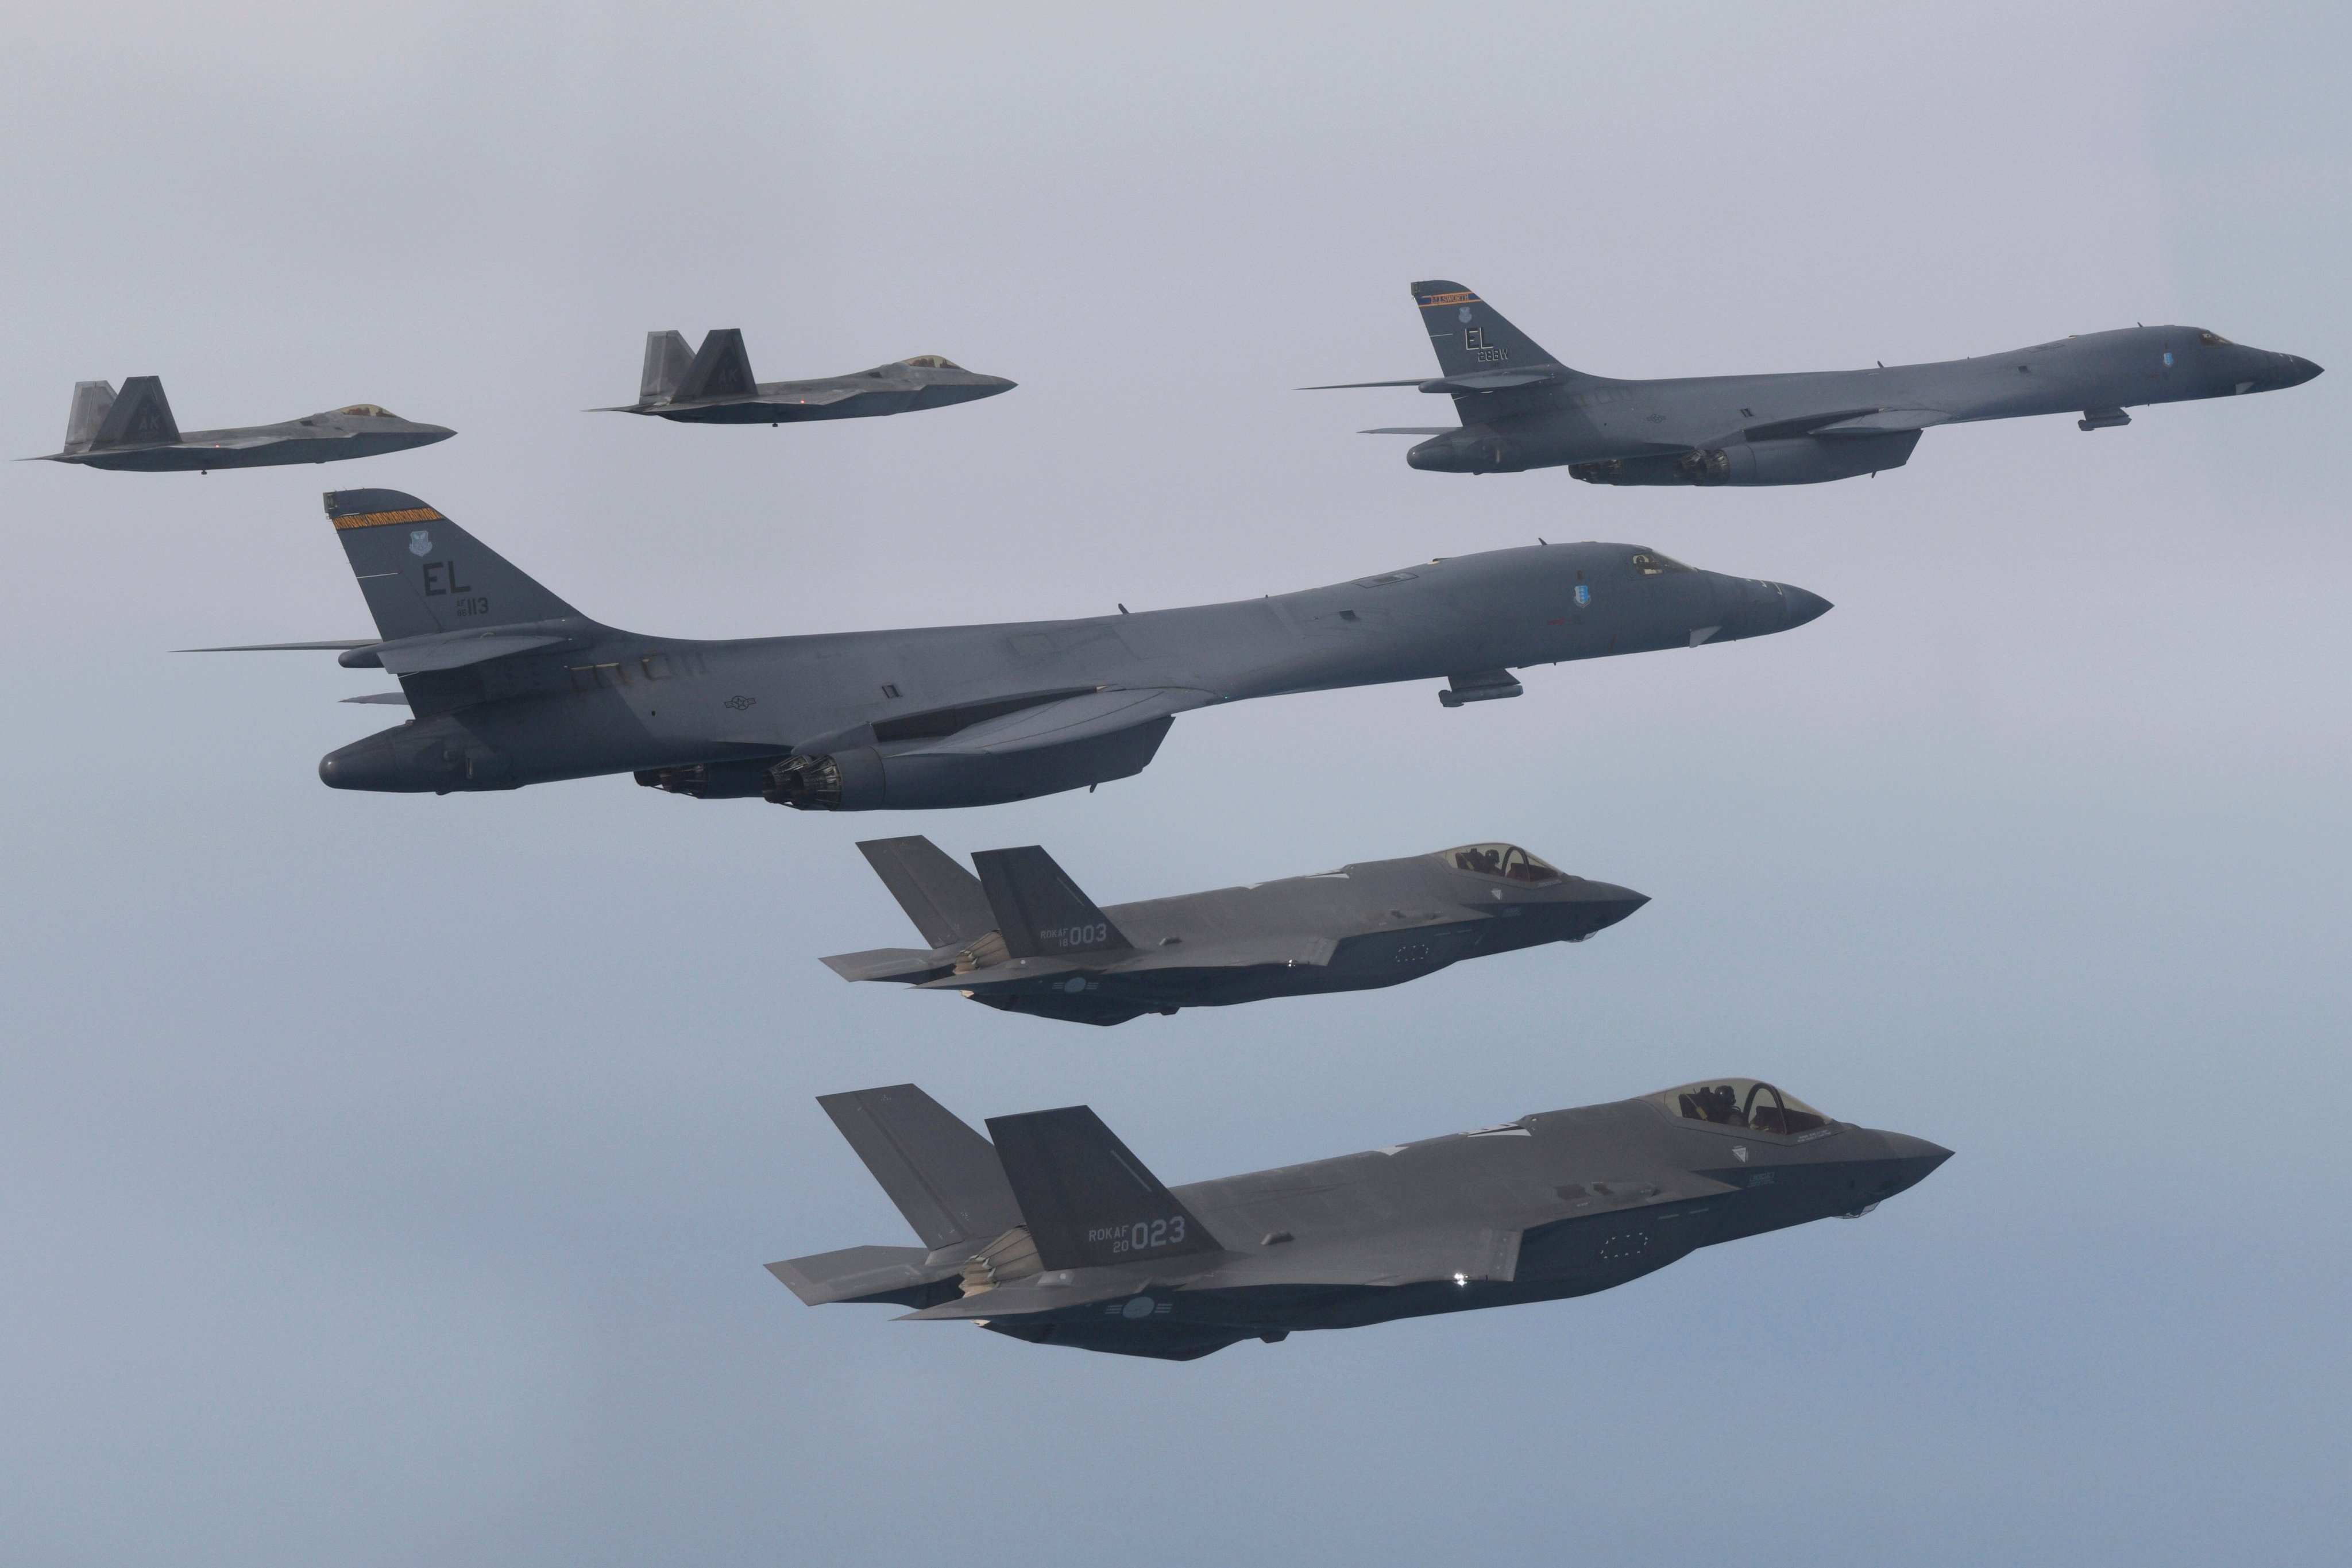 US Air Force B-1B bombers (centre), F-22 fighter jets and South Korean Air Force F-35 fighter jets (bottom) fly over South Korea during a joint air drill on January 1. On February 2, North Korea threatened the “toughest reaction” to the US’ expanding joint military exercises with South Korea to counter the North’s growing nuclear weapons ambitions, claiming that the allies were pushing tensions to an “extreme red line”. Photo: South Korean Defence Ministry via AP